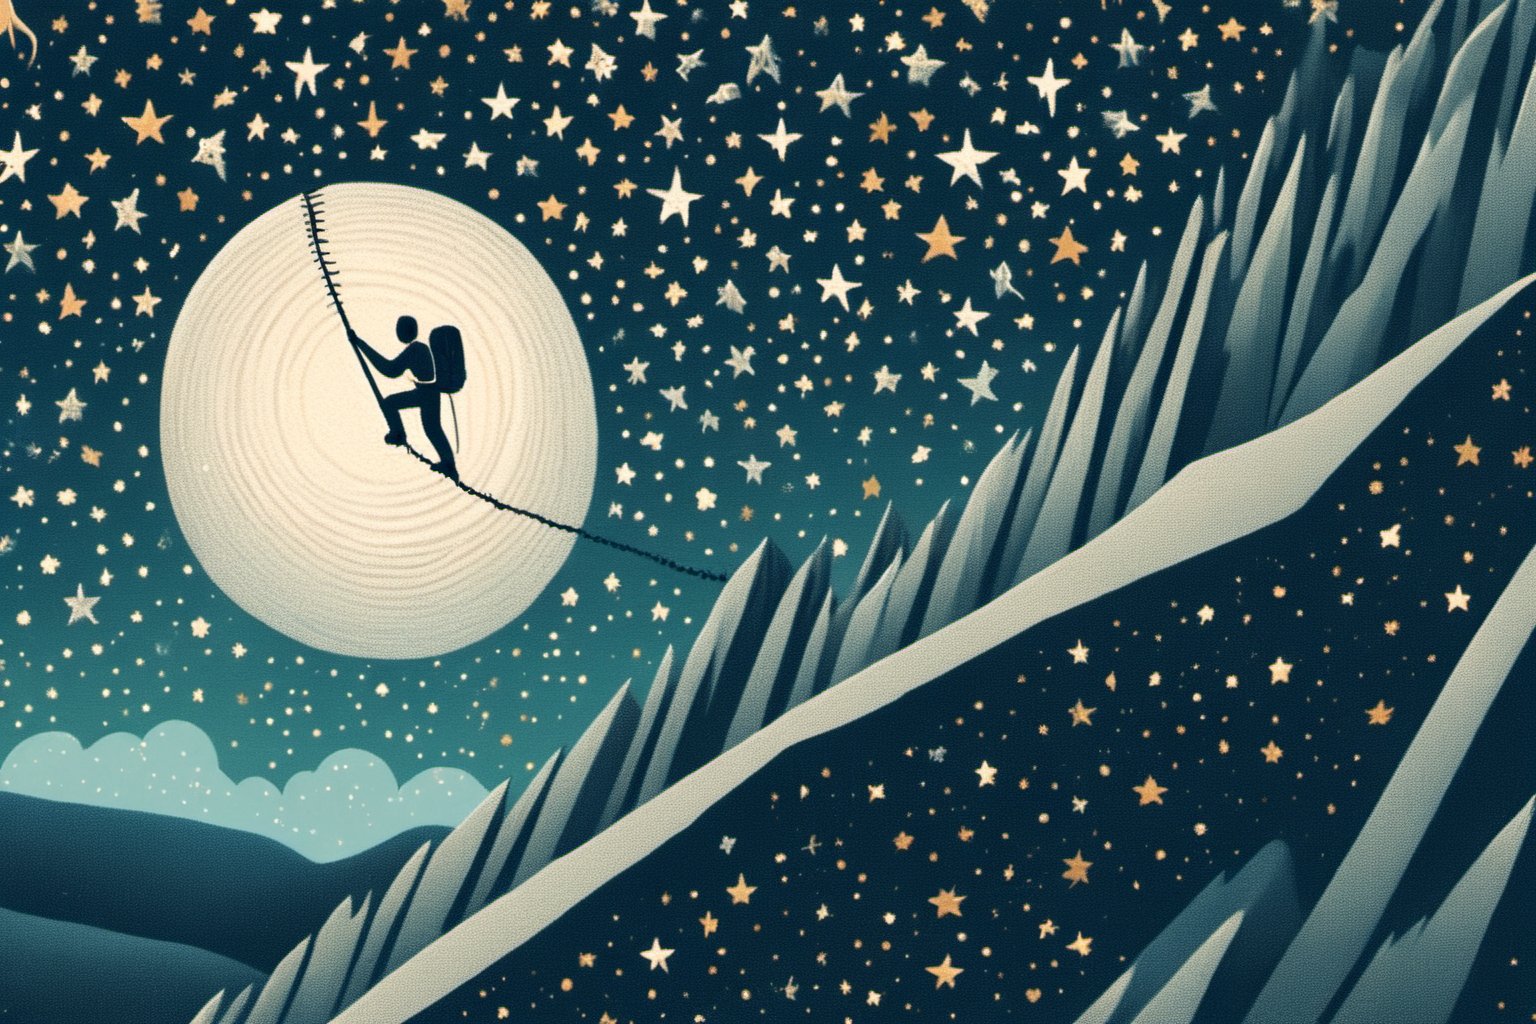 Illustration inspired by the Latin phrase 'Non est ad astra mollis e terris via' which translates to 'There is no easy way from the earth to the stars'. It depicts a person determinedly climbing a steep mountain path, reaching towards the shimmering stars in the night sky